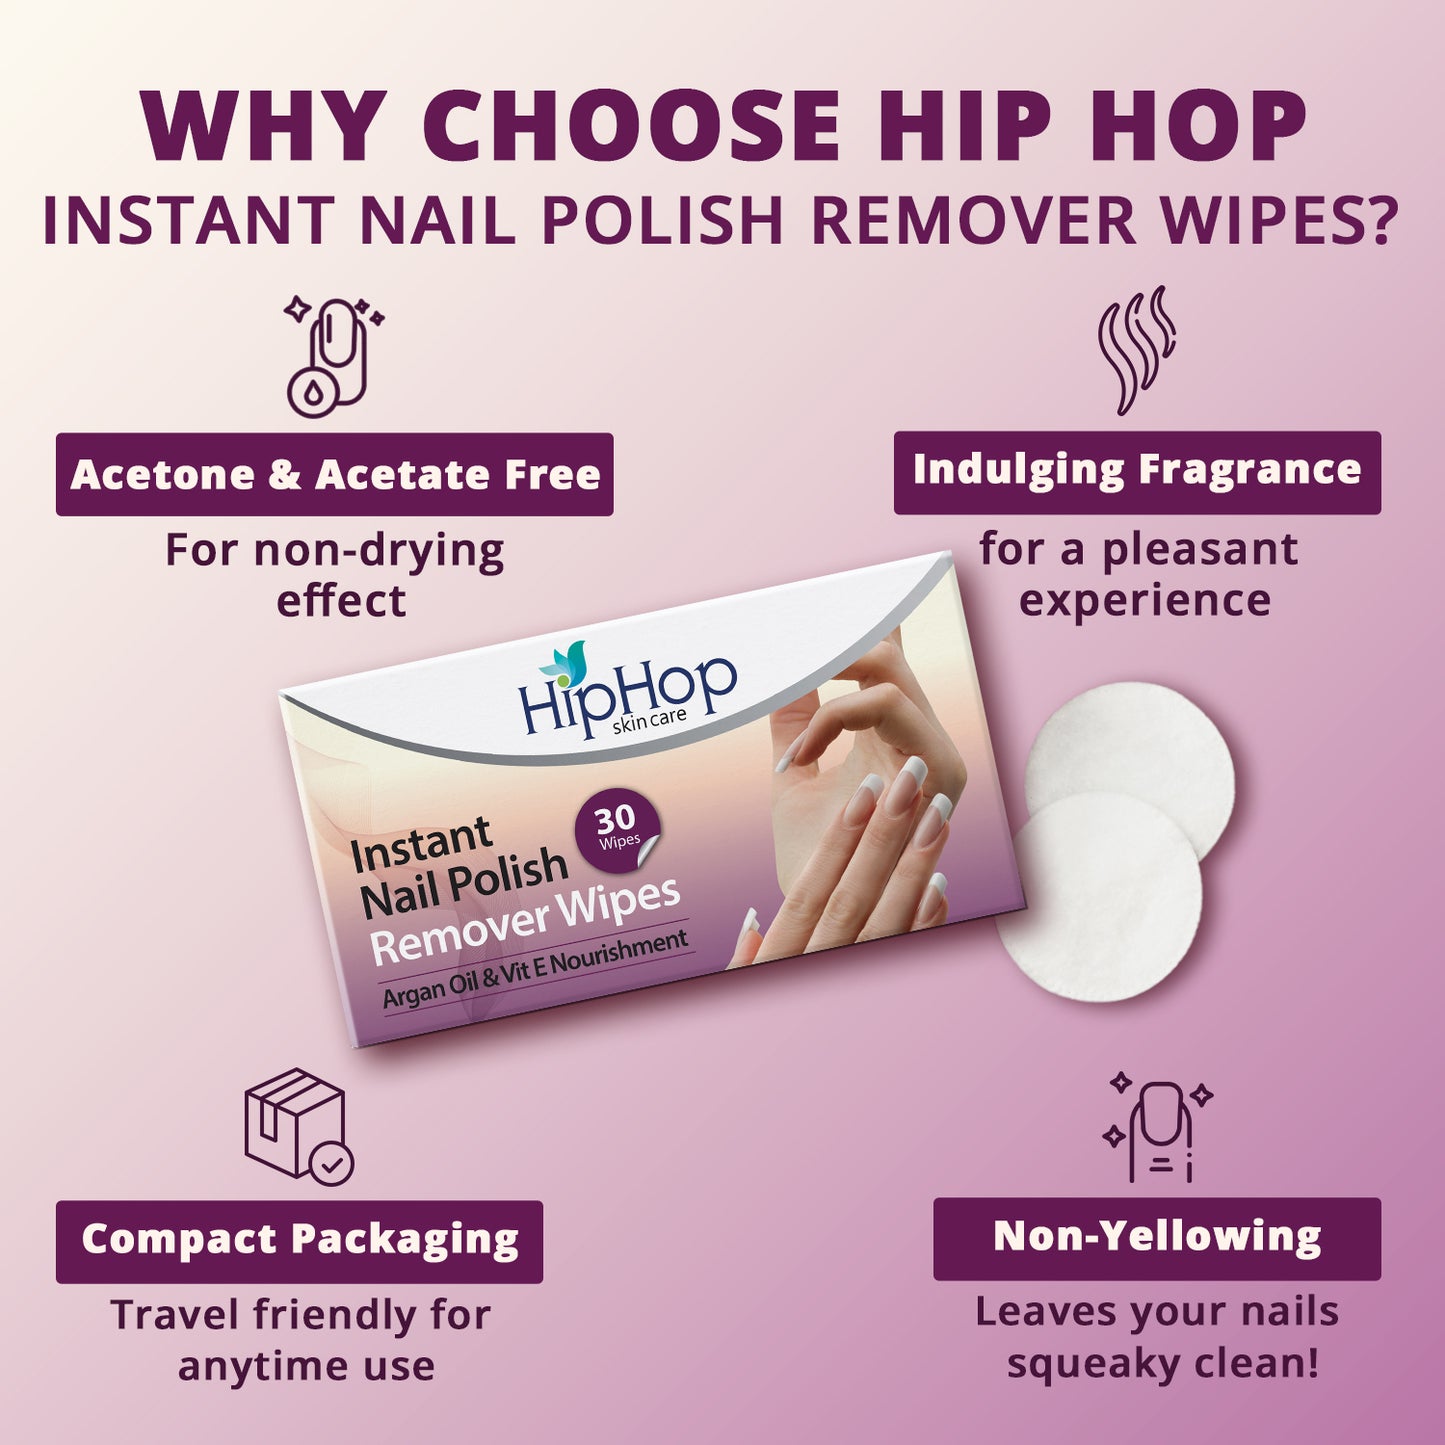 Instant Nail Polish Remover Wipes - 30 Wipes